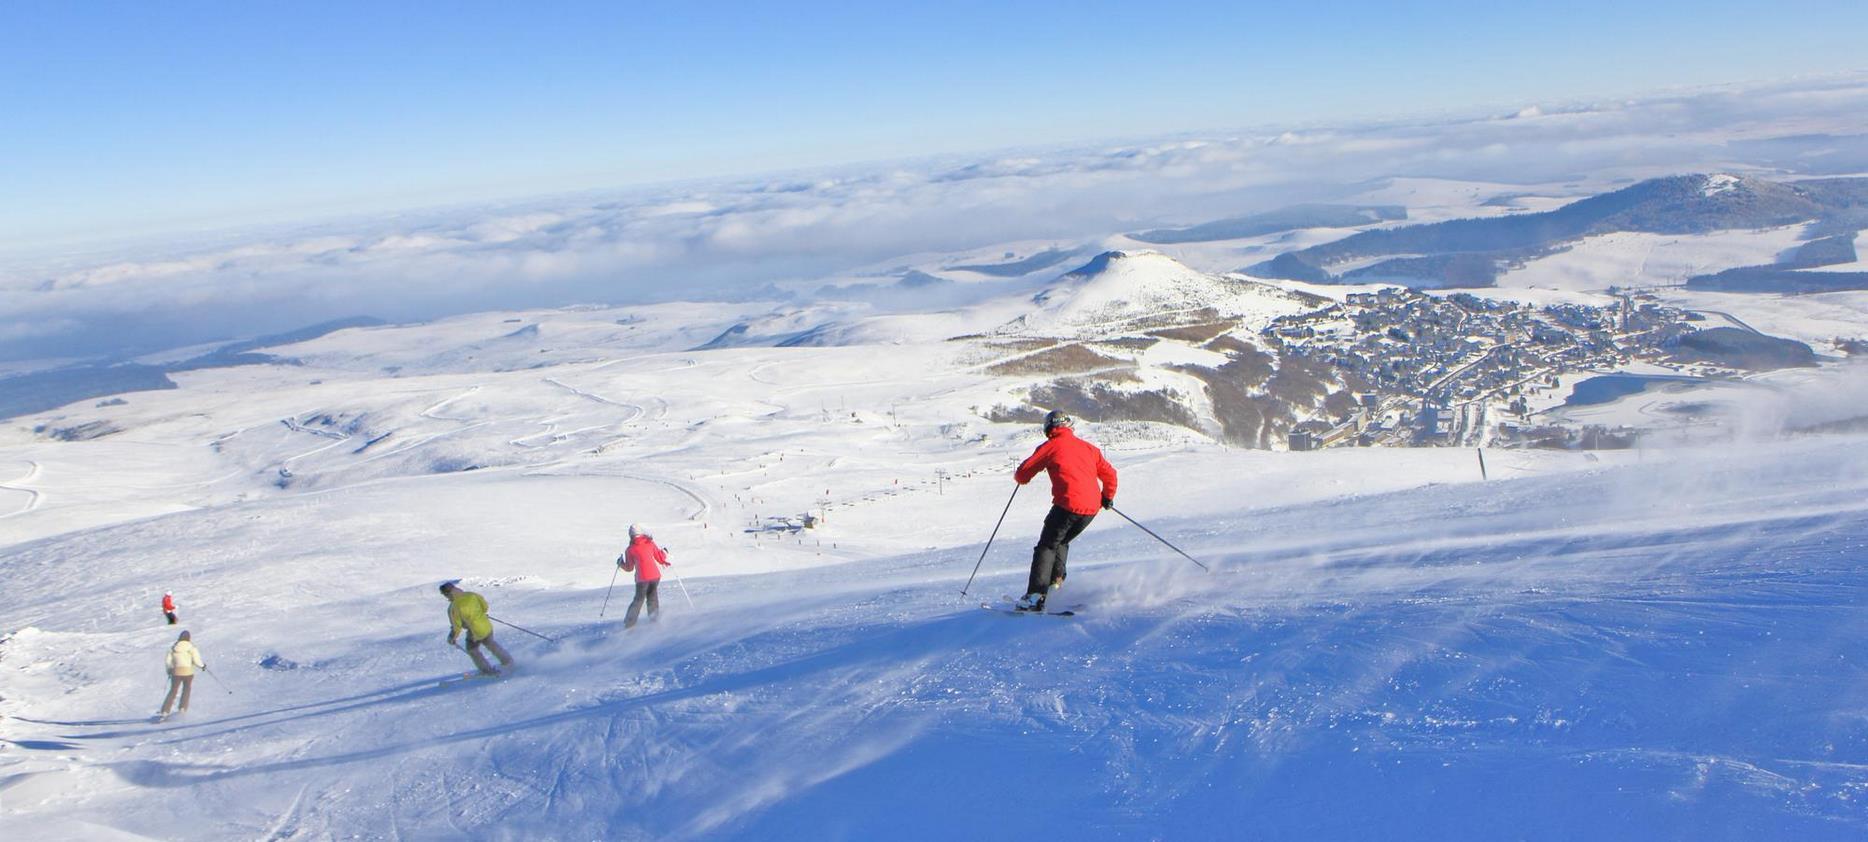 Super Besse resort - family alpine skiing with a view of the resort